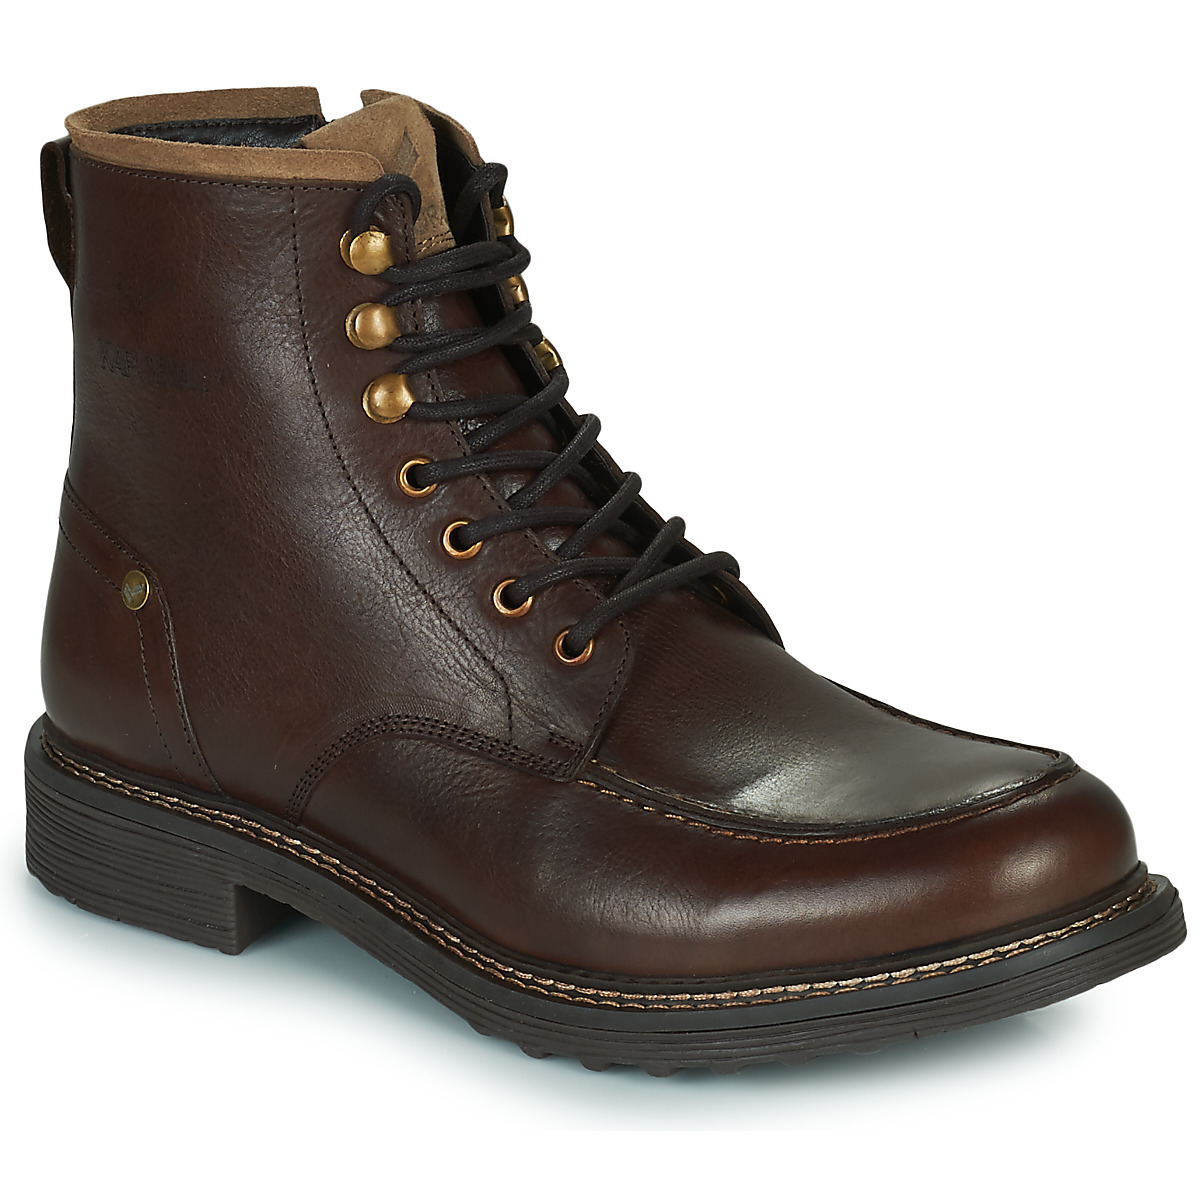 Gents Brown Boots at Spartoo GOOFASH